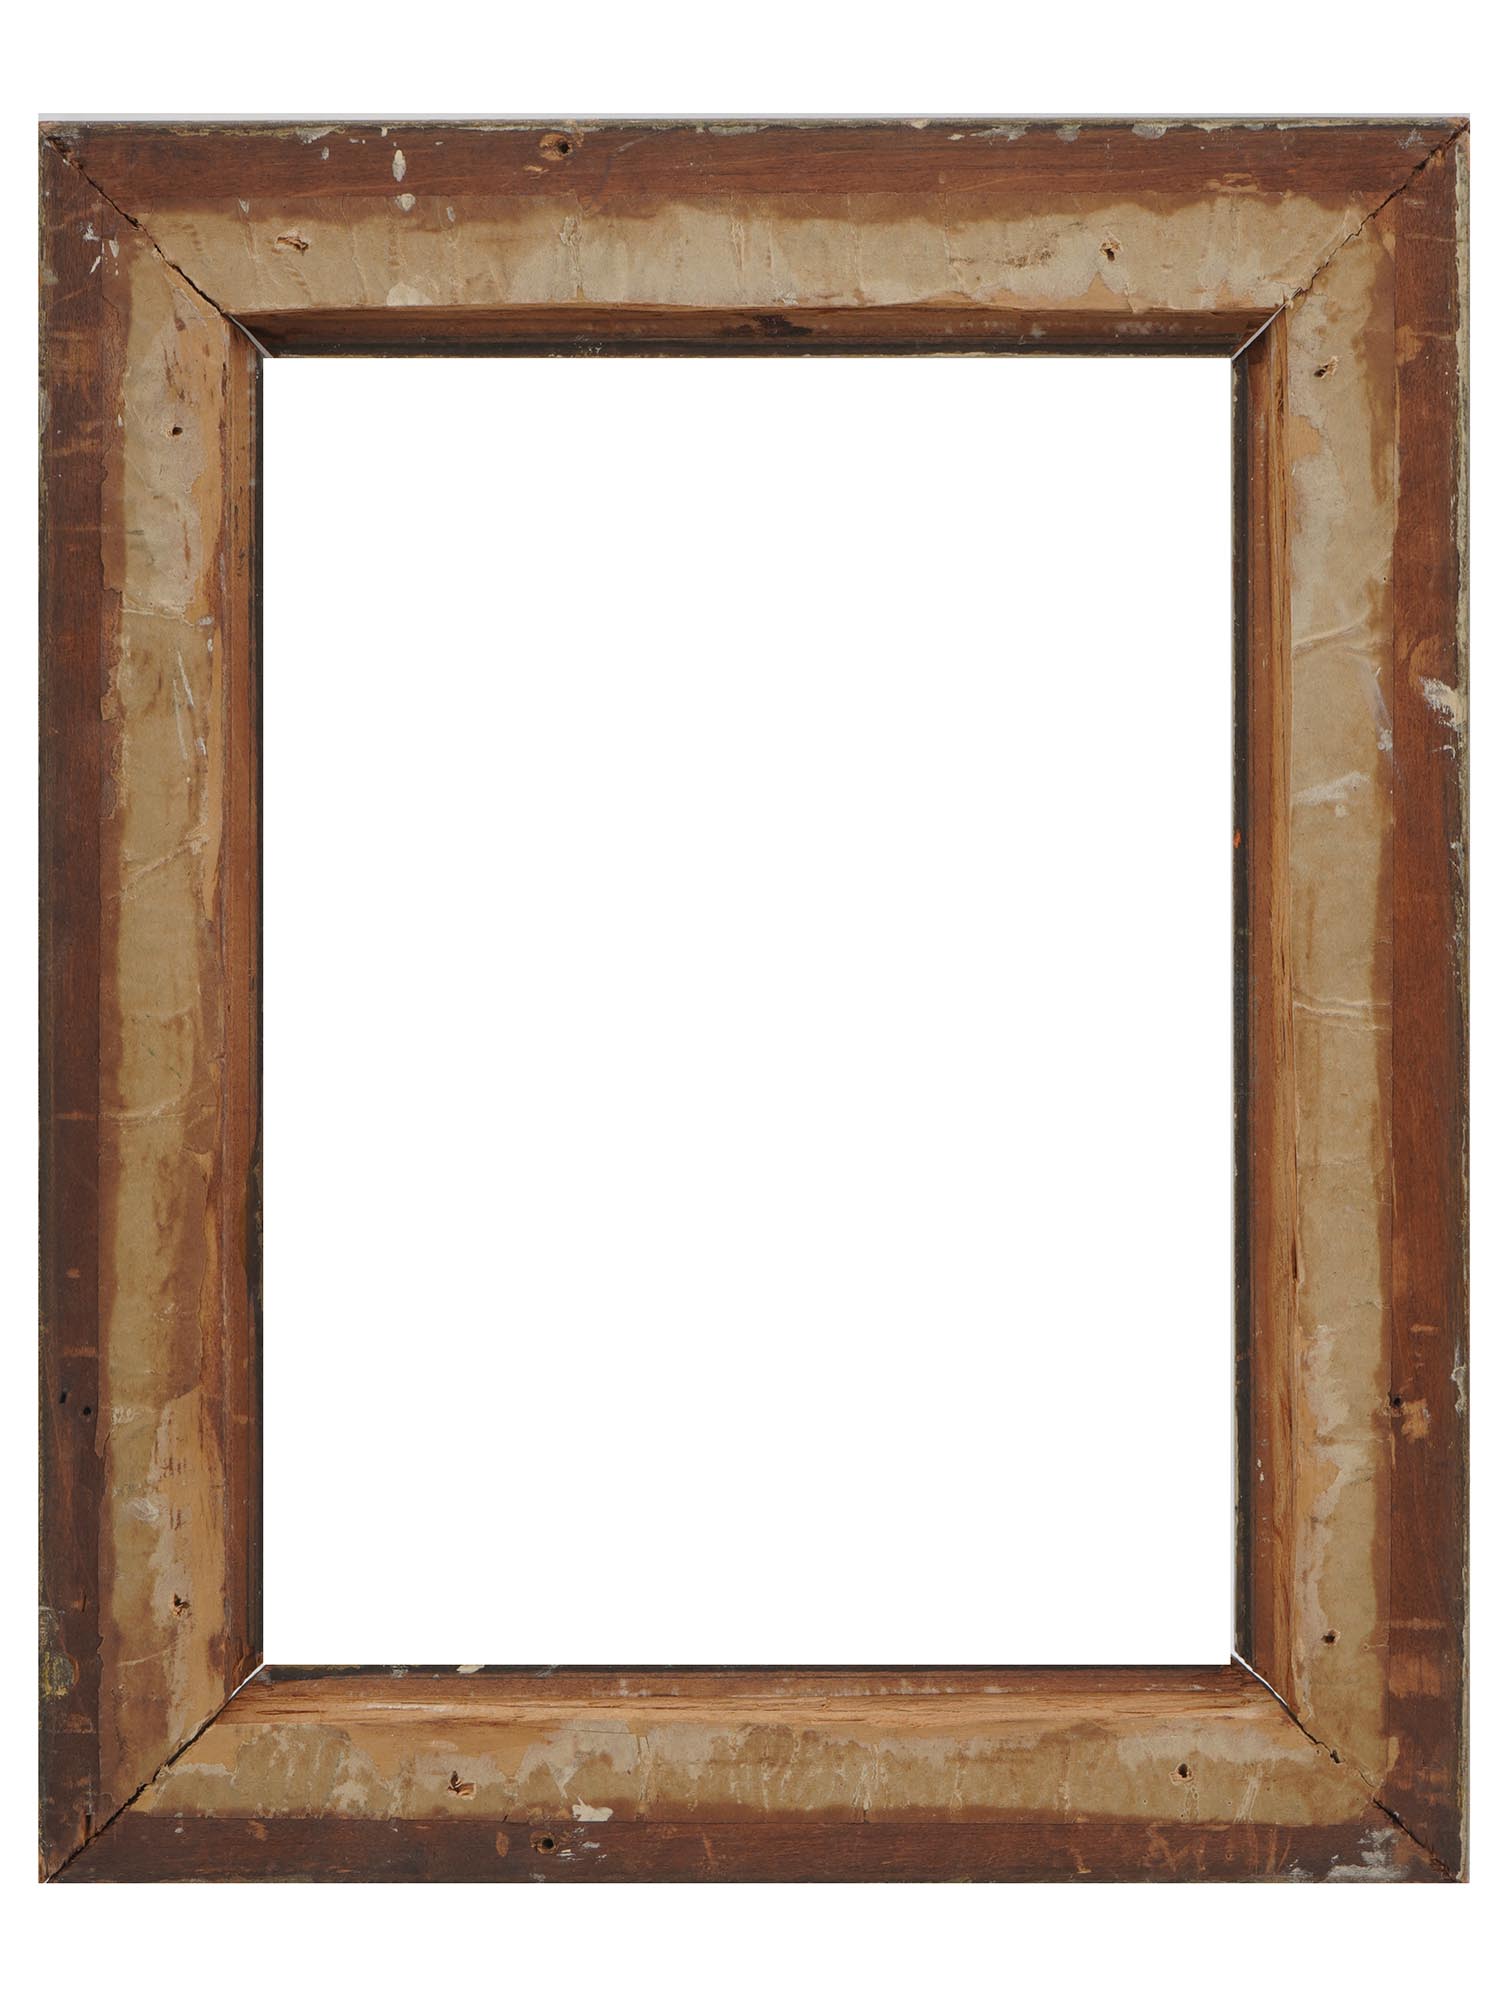 ANTIQUE CONTINENTAL CARVED PATINATED WOOD FRAMES PIC-4